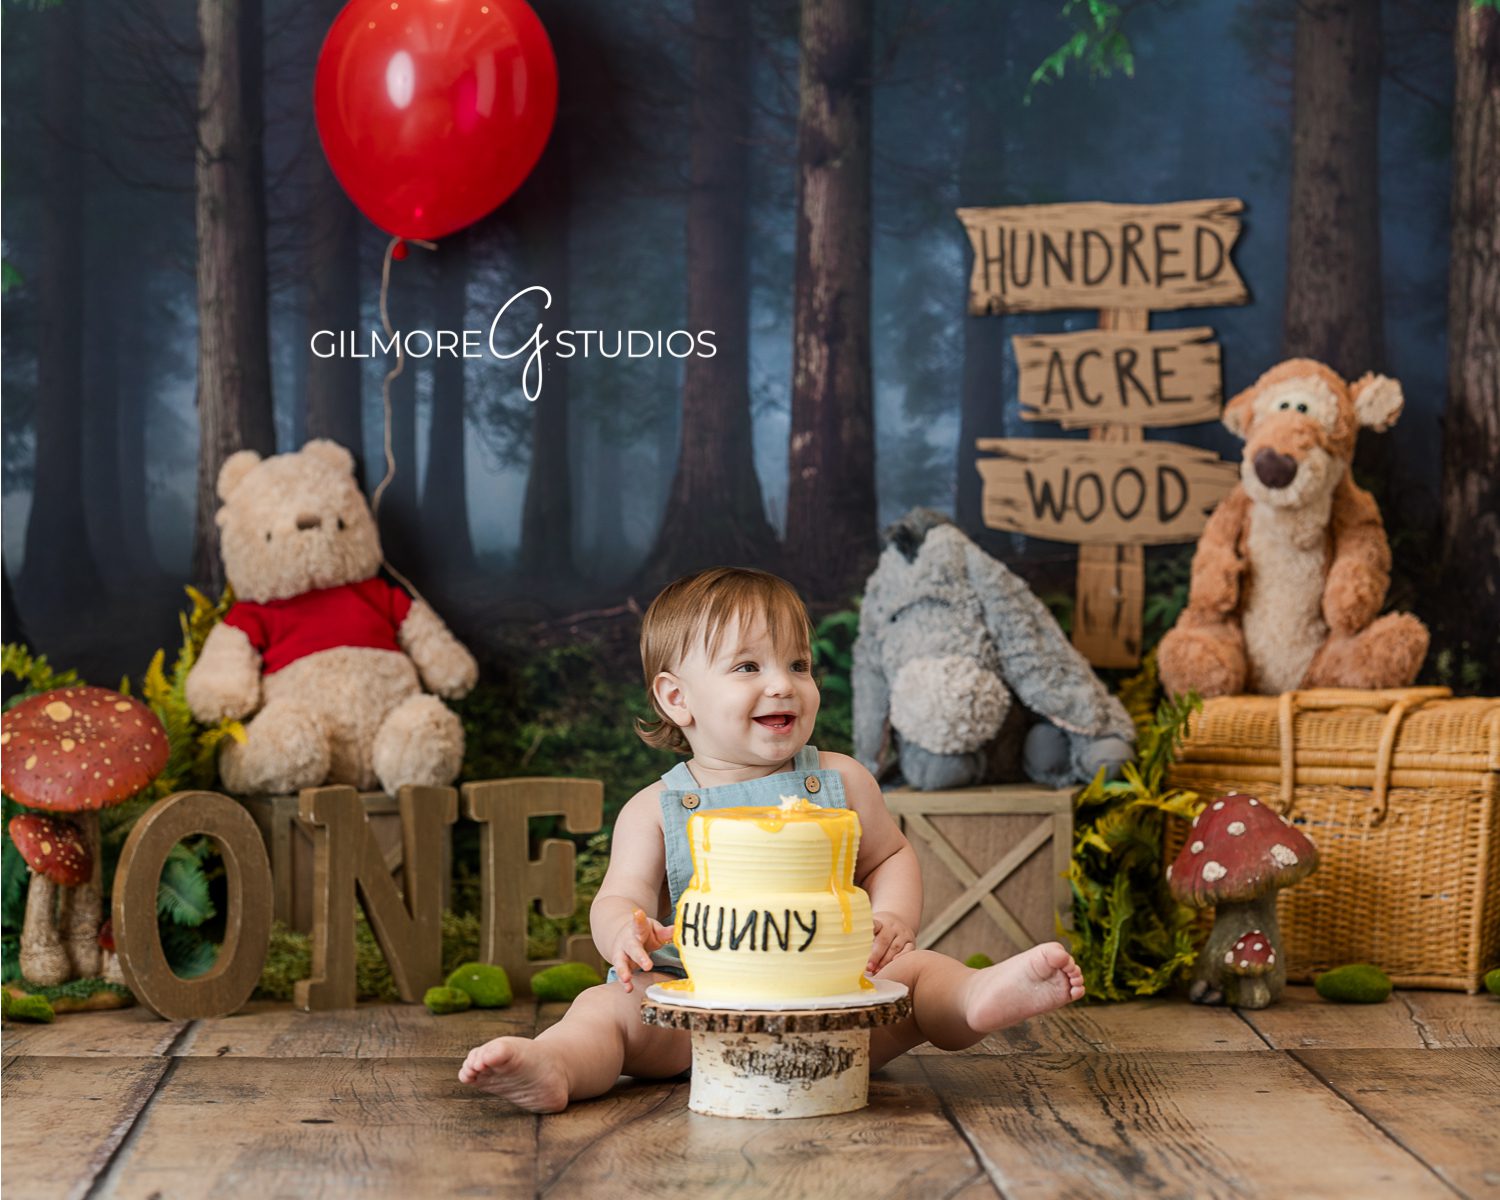 winnie the pooh cake smash, winnie the pooh theme, hundred acre wood, pooh bear, tigger, piglet, honey, hunny, custom cake, one year old, first birthday, christopher robin, when we were very young, e. h. shepard, the house at pooh corner, photographer, photo, photography set design, red balloon, birthday party